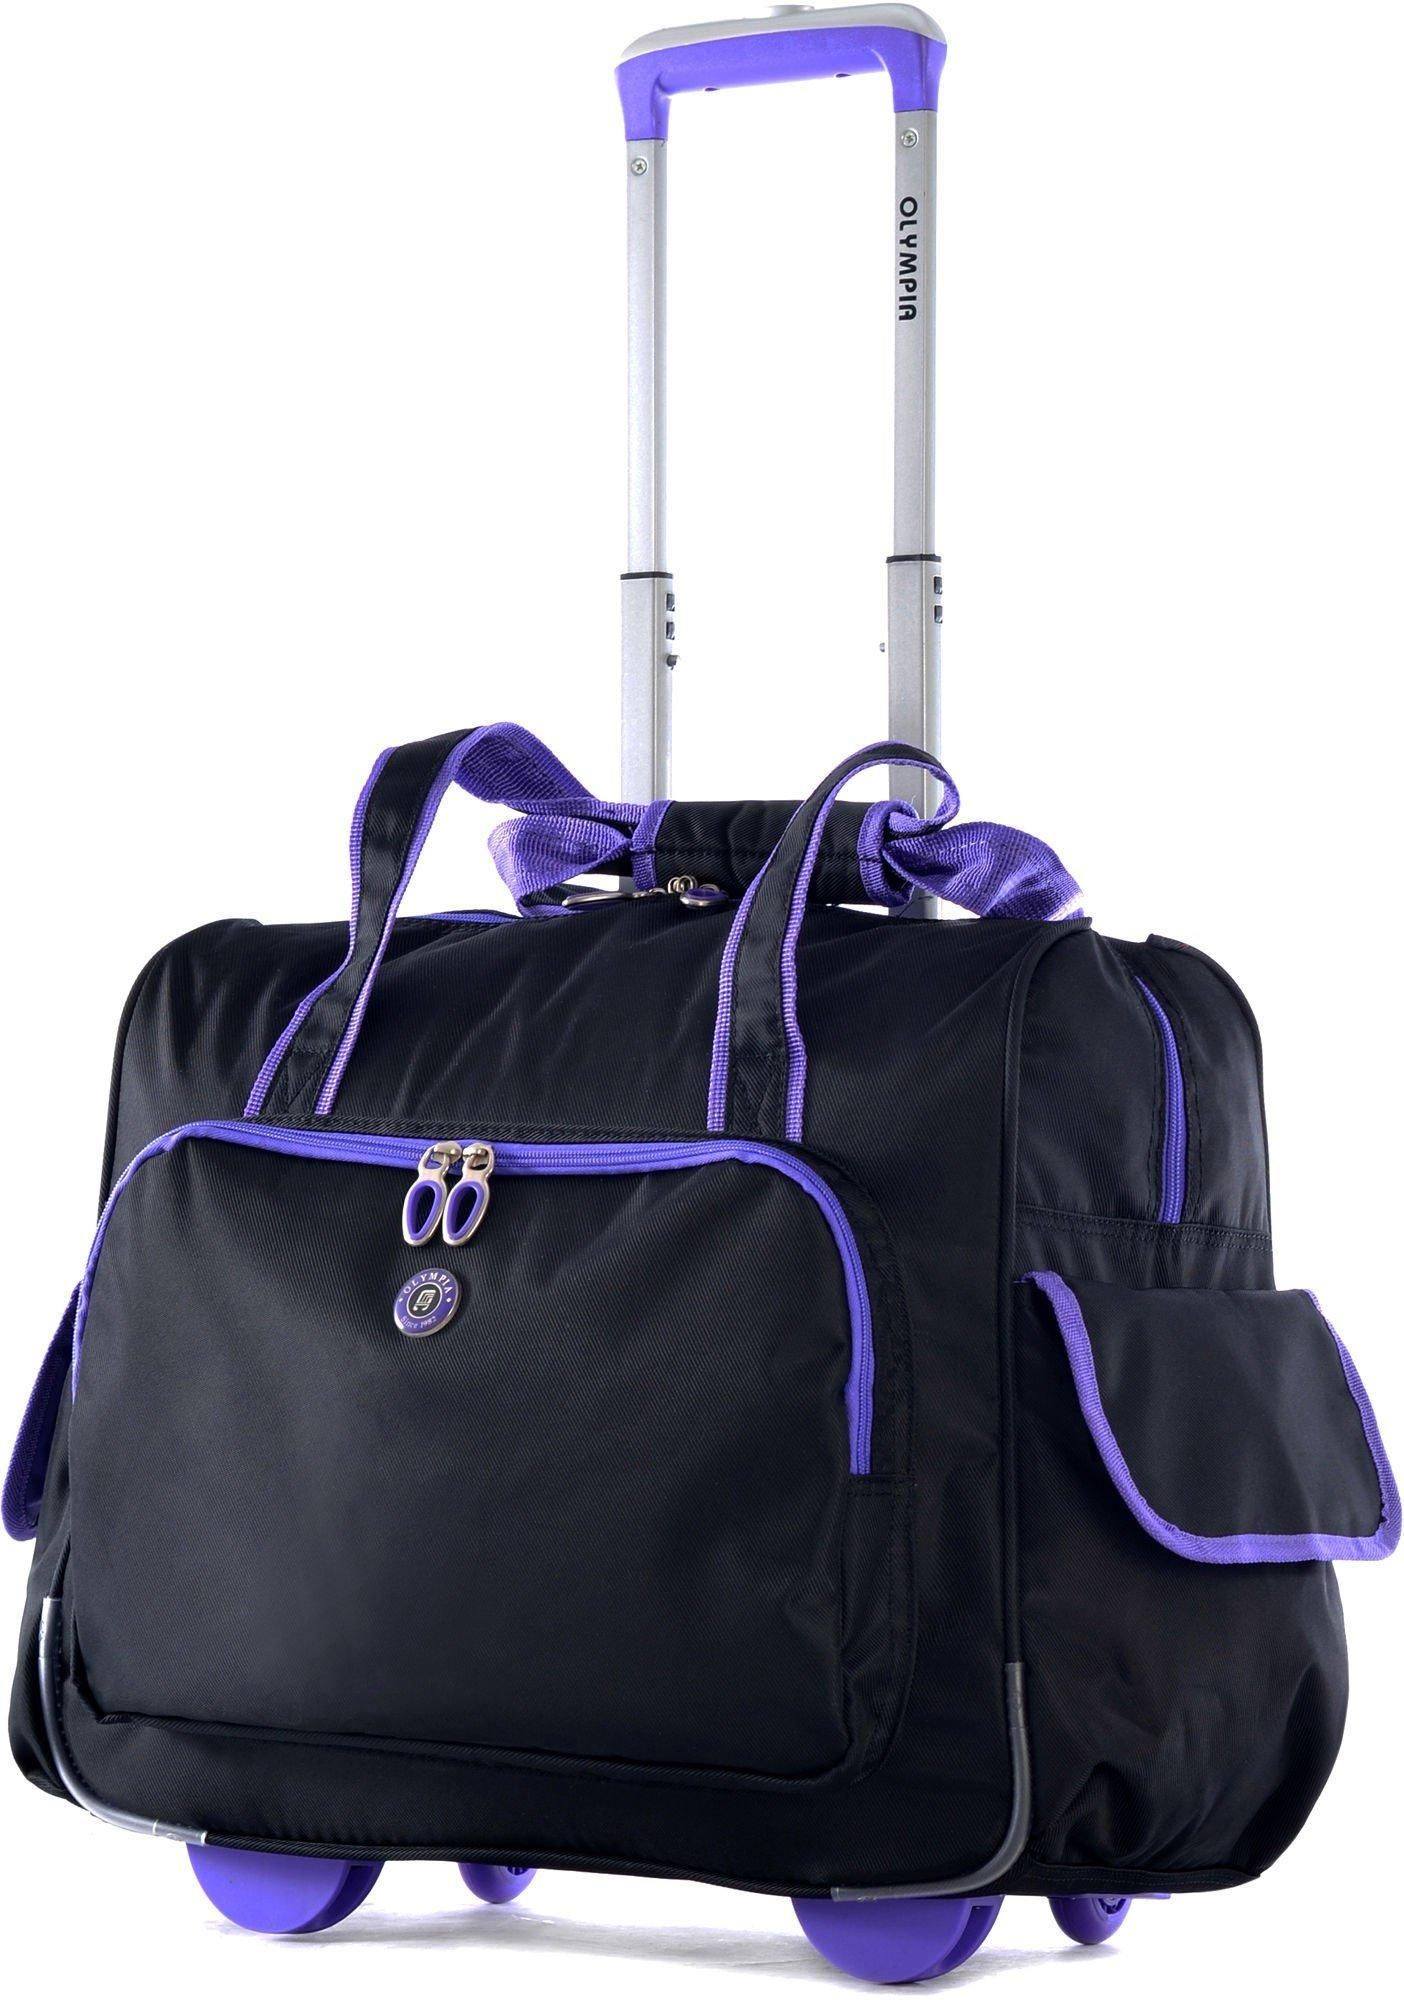 Olympia Luggage Rave Rolling Overnight Tote